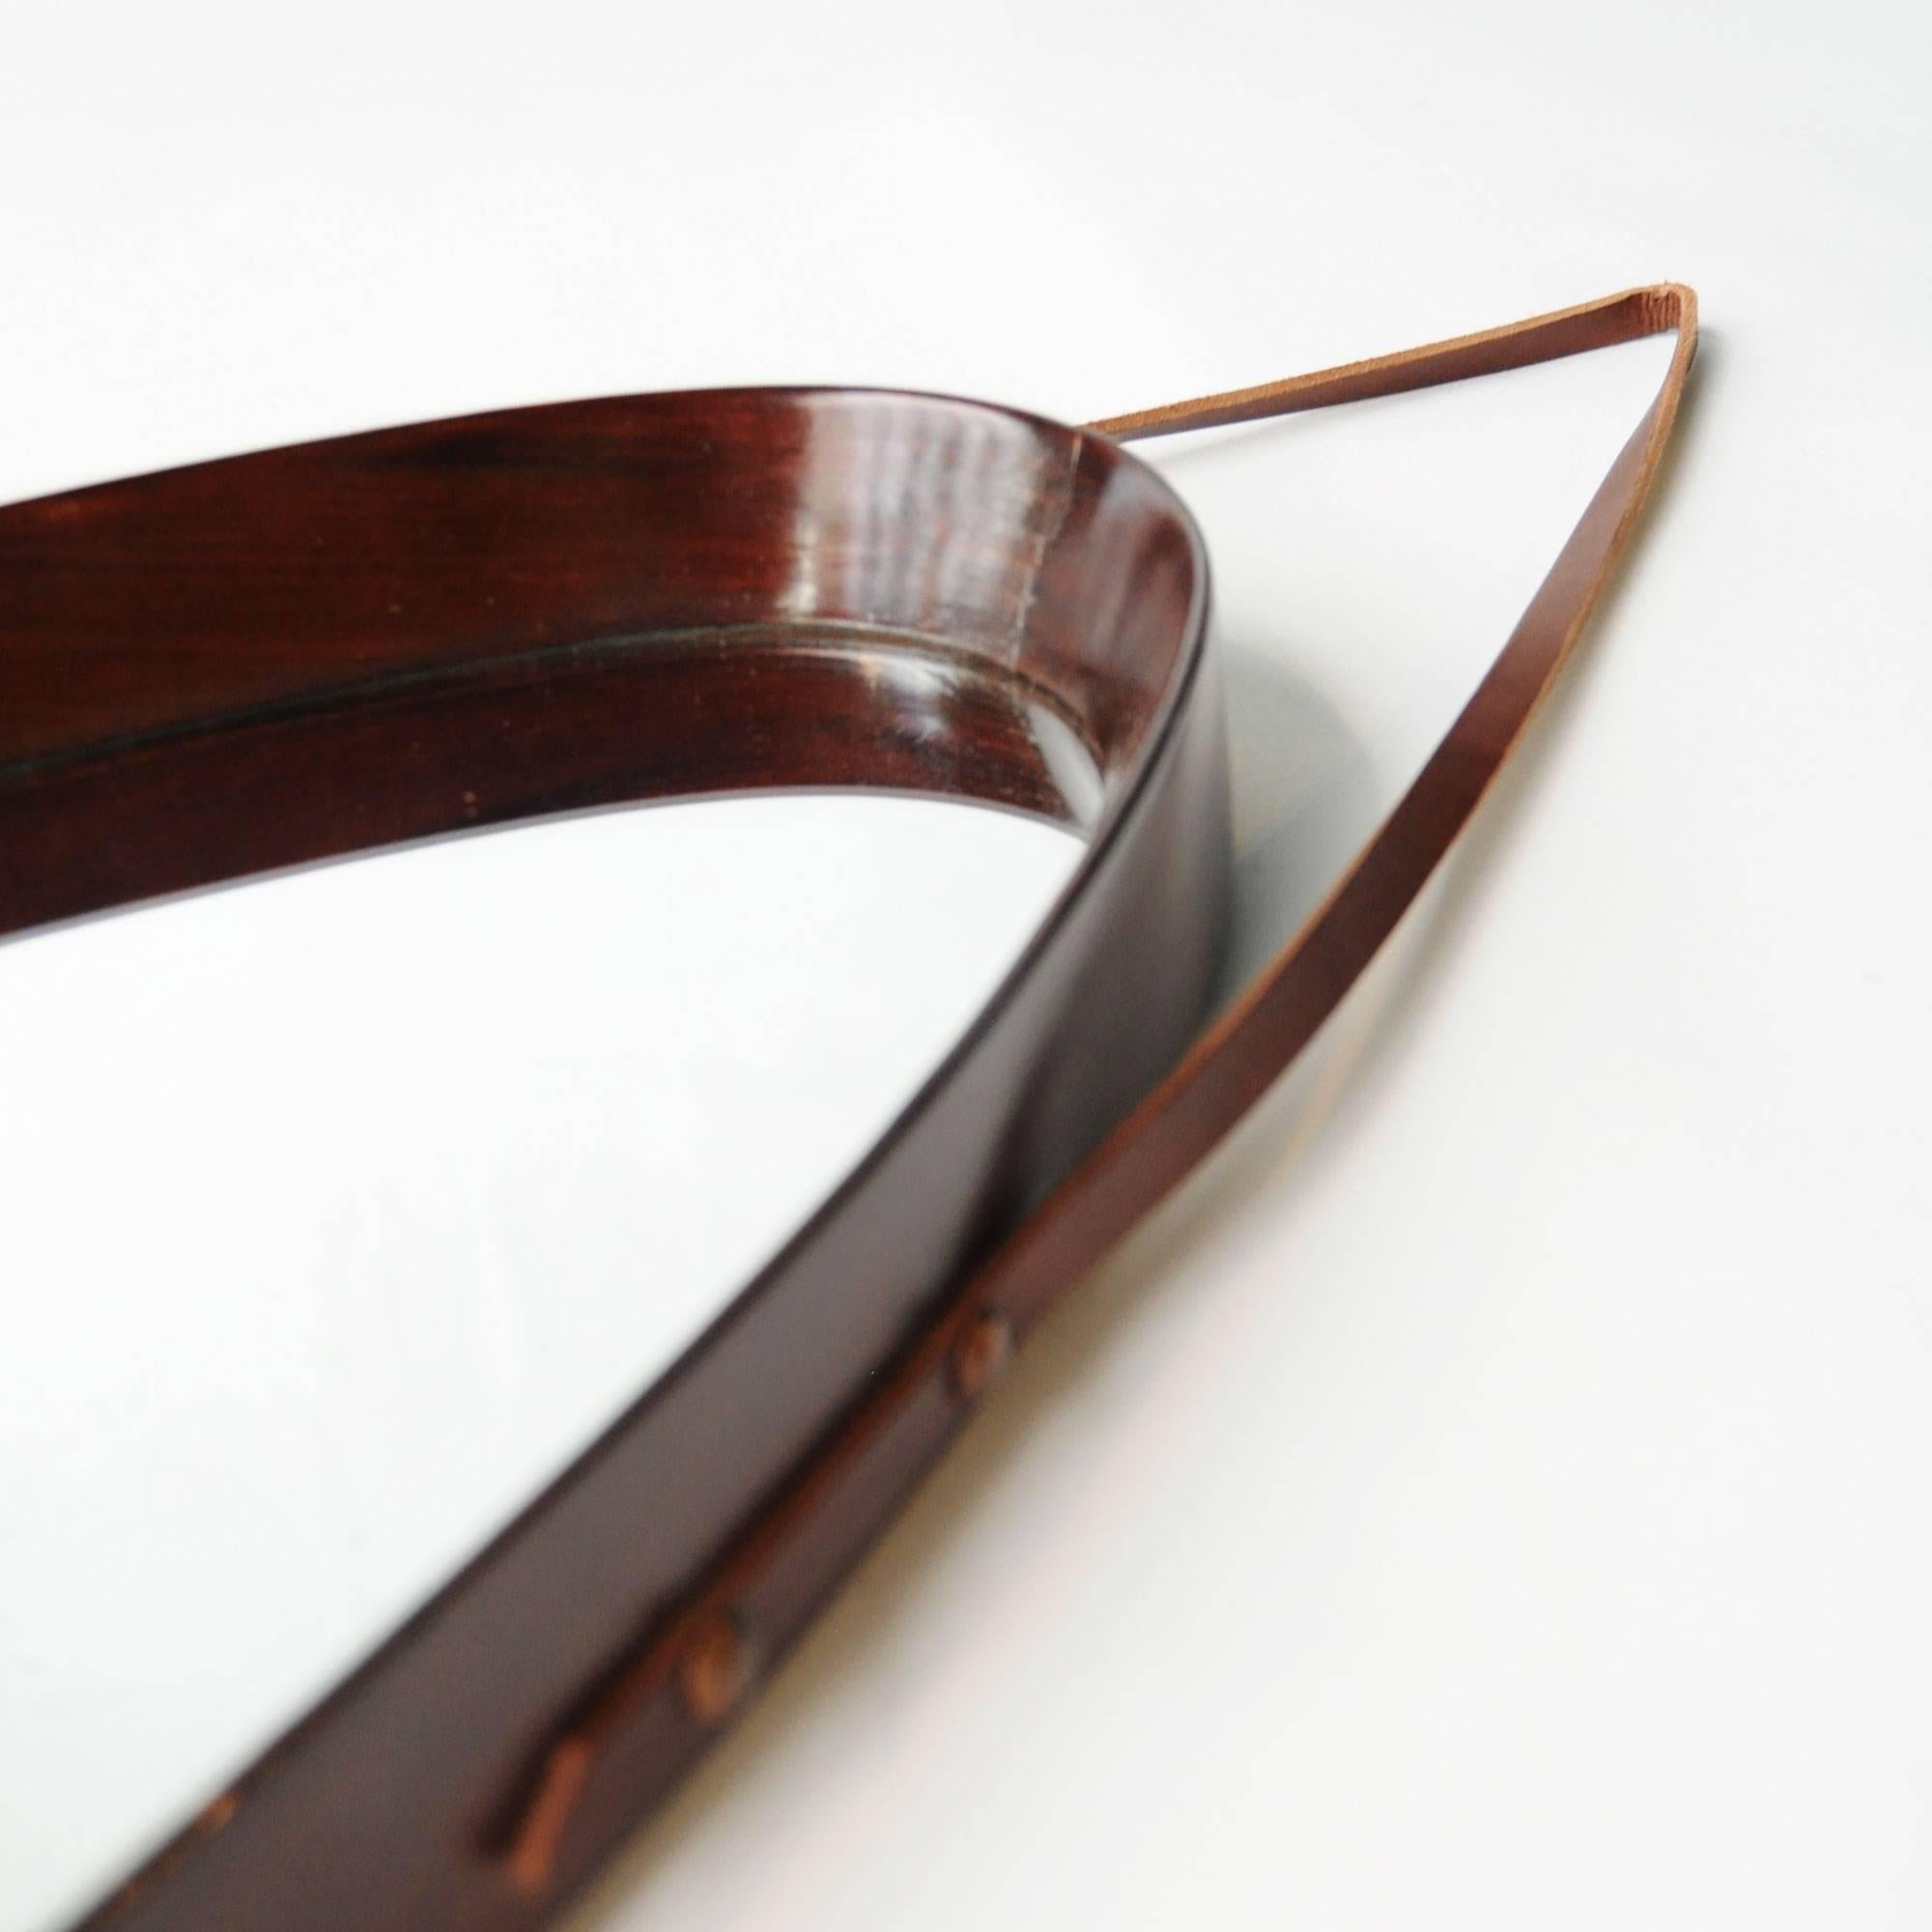 Original French mirror with a frame made in walnut wood and leather girth.